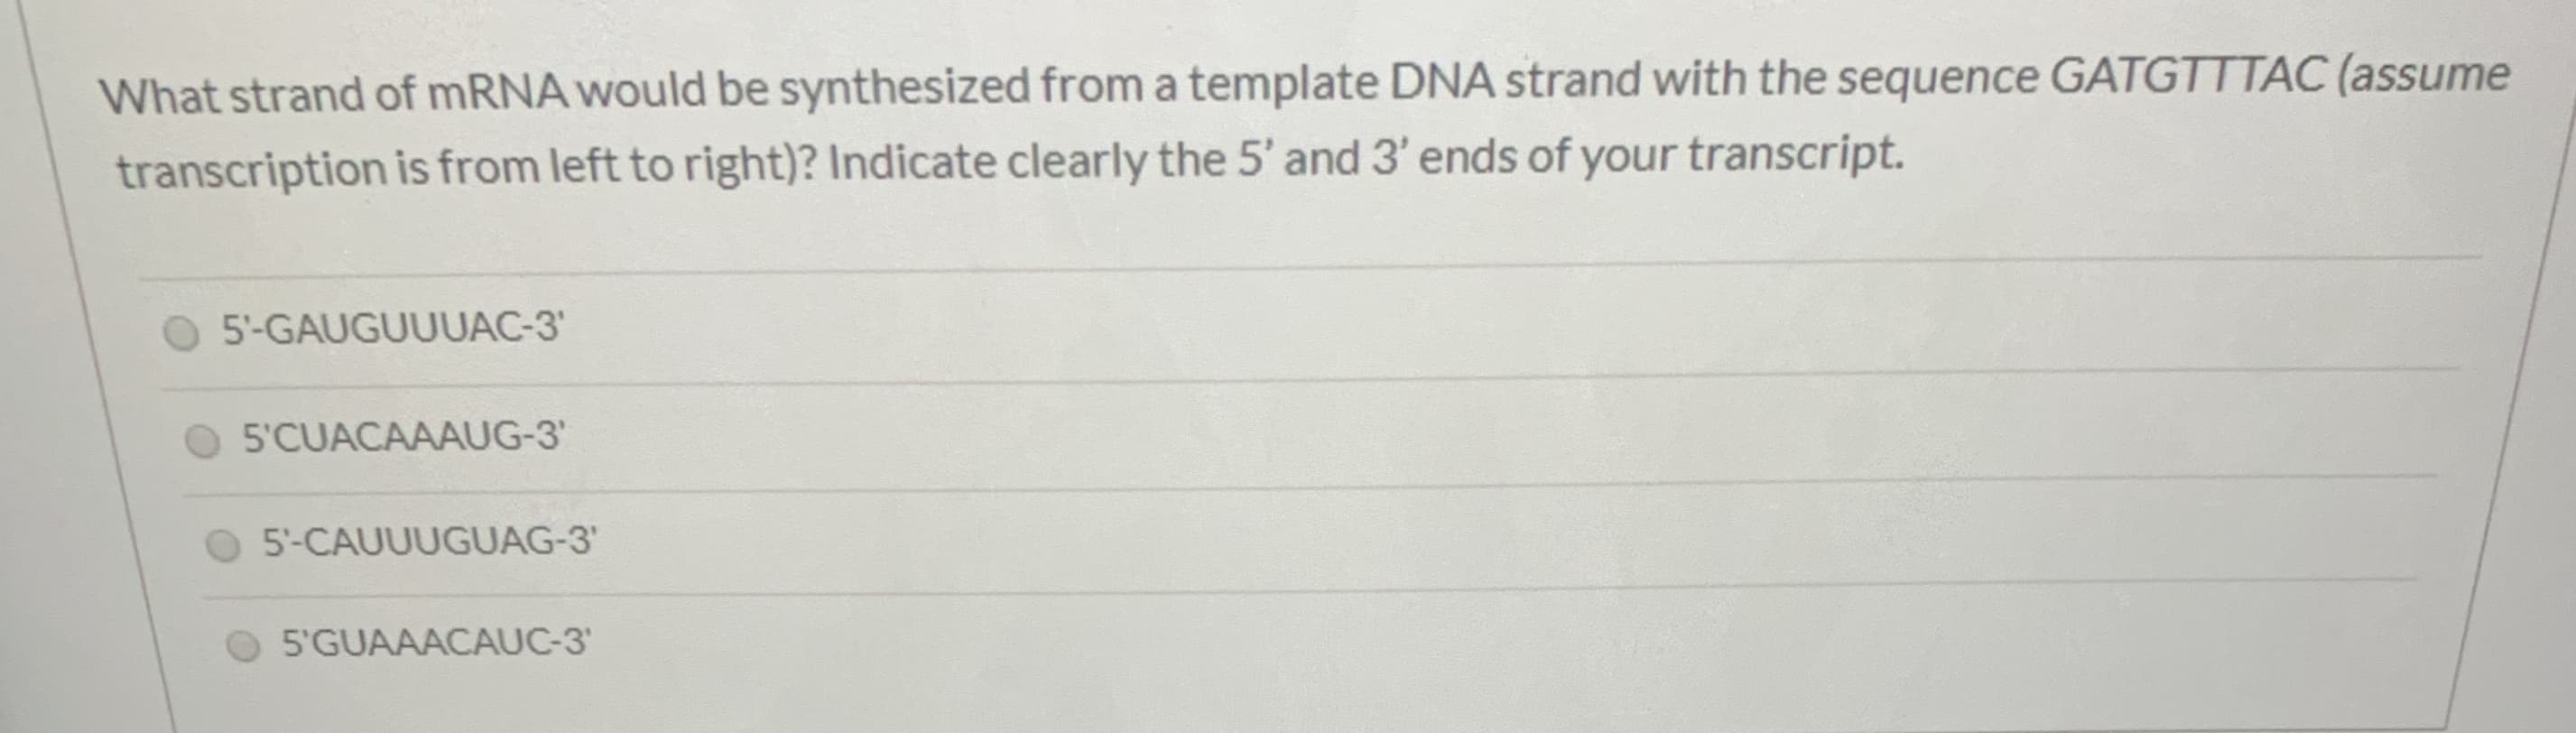 What strand of mRNA would be synthesized from a template DNA strand with the sequence GATGTTTAC (assume
transcription is from left to right)? Indicate clearly the 5' and 3' ends of your transcript.
5'-GAUGUUUAC-3'
5'CUACAAAUG-3'
5'-CAUUUGUAG-3'
5'GUAAACAUC-3
